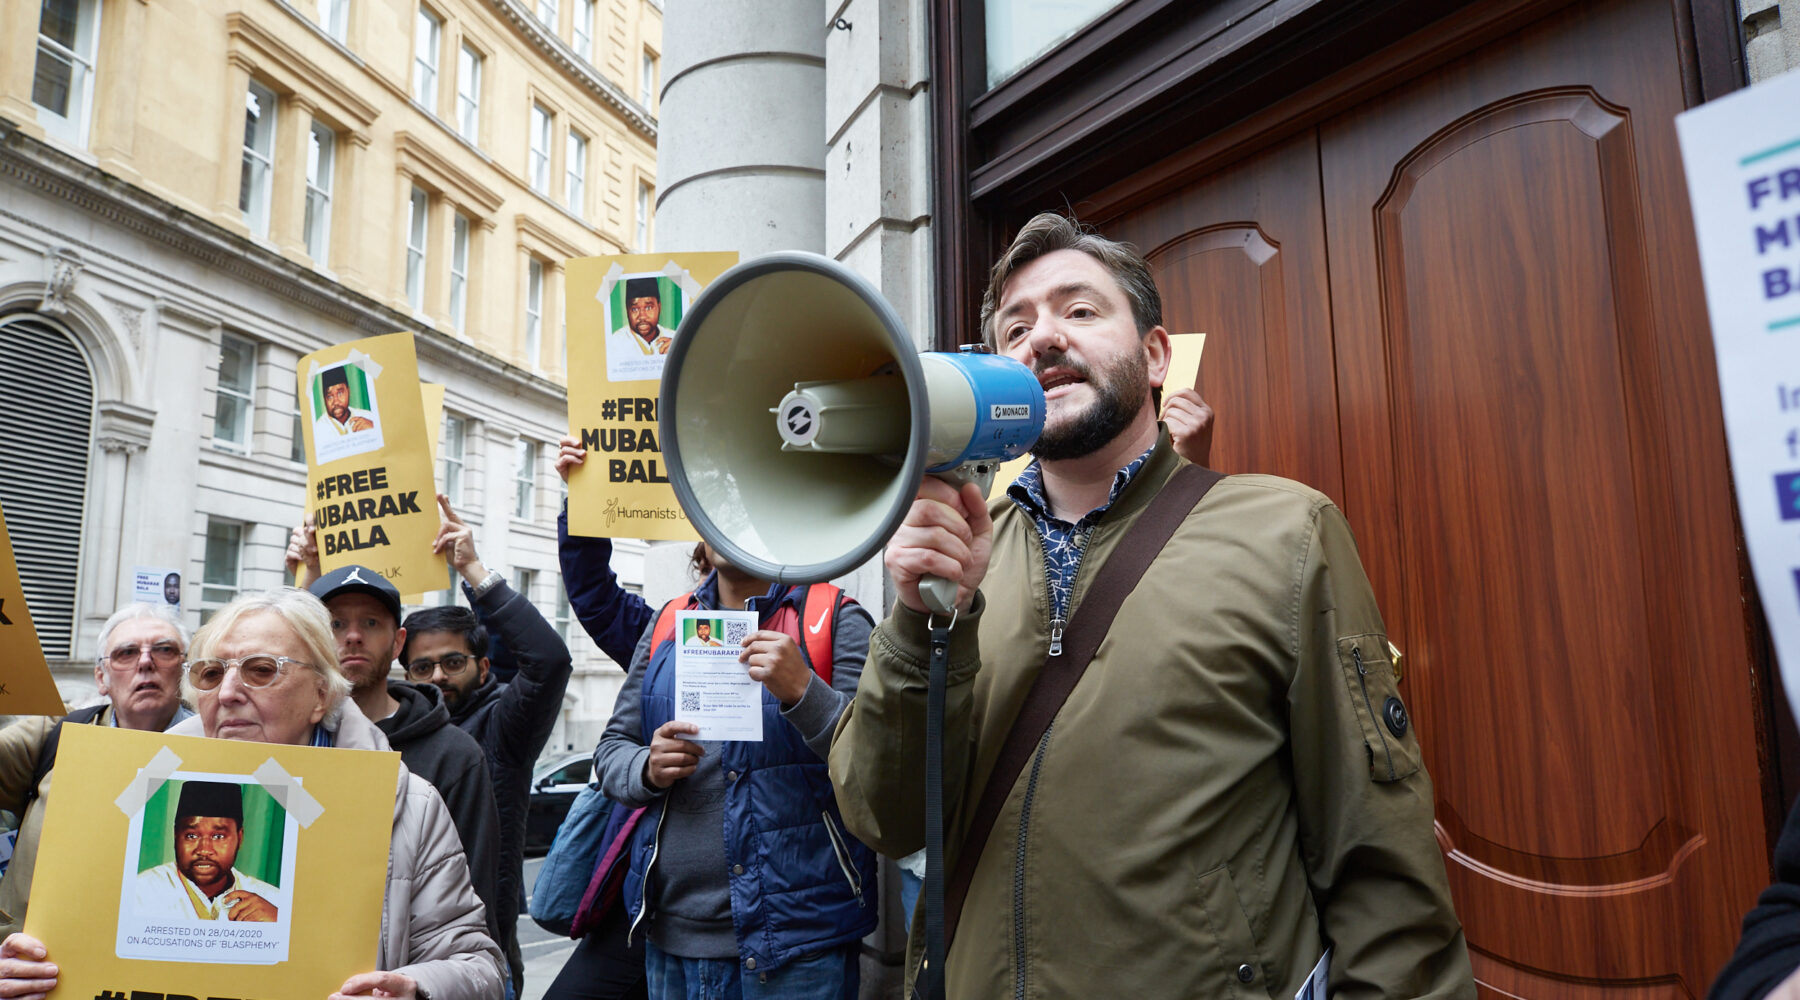 Andrew Copson protests with Humanists UK